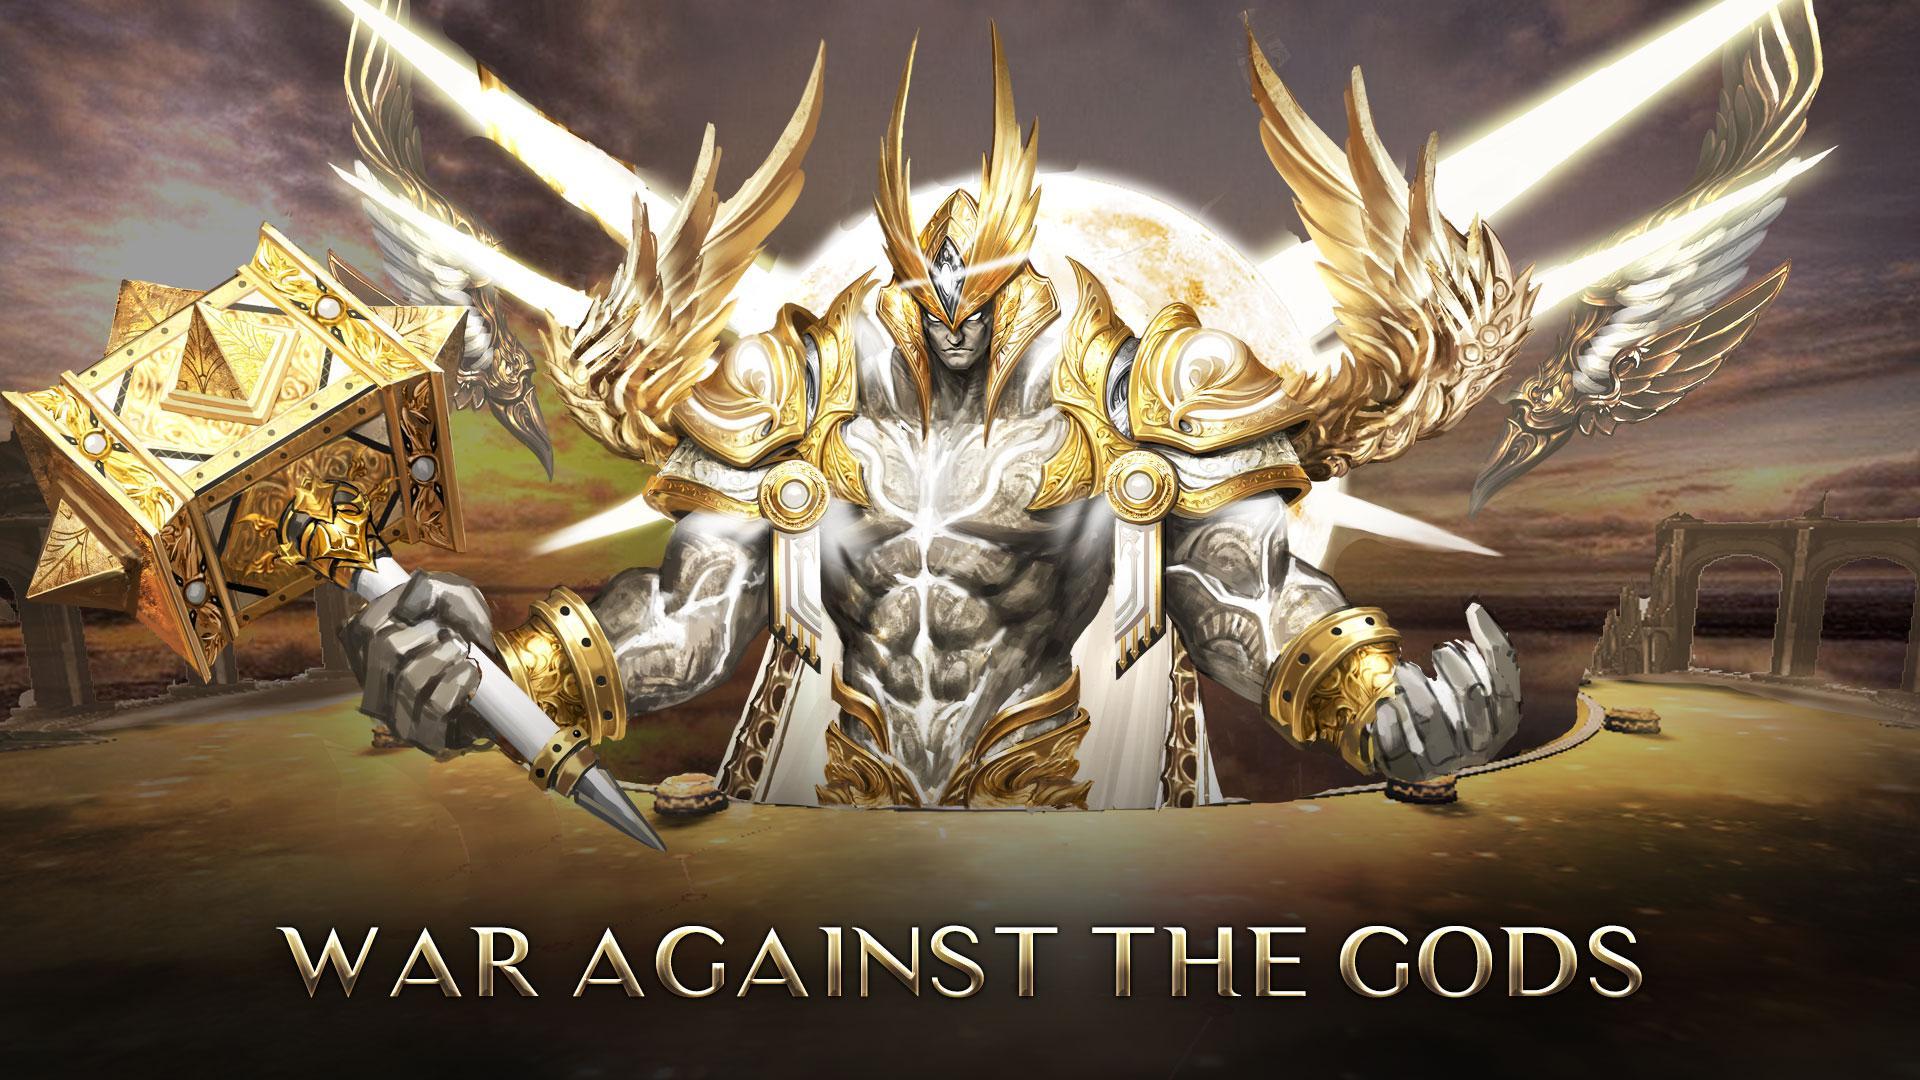 Era of Celestials for Android - APK Download - 